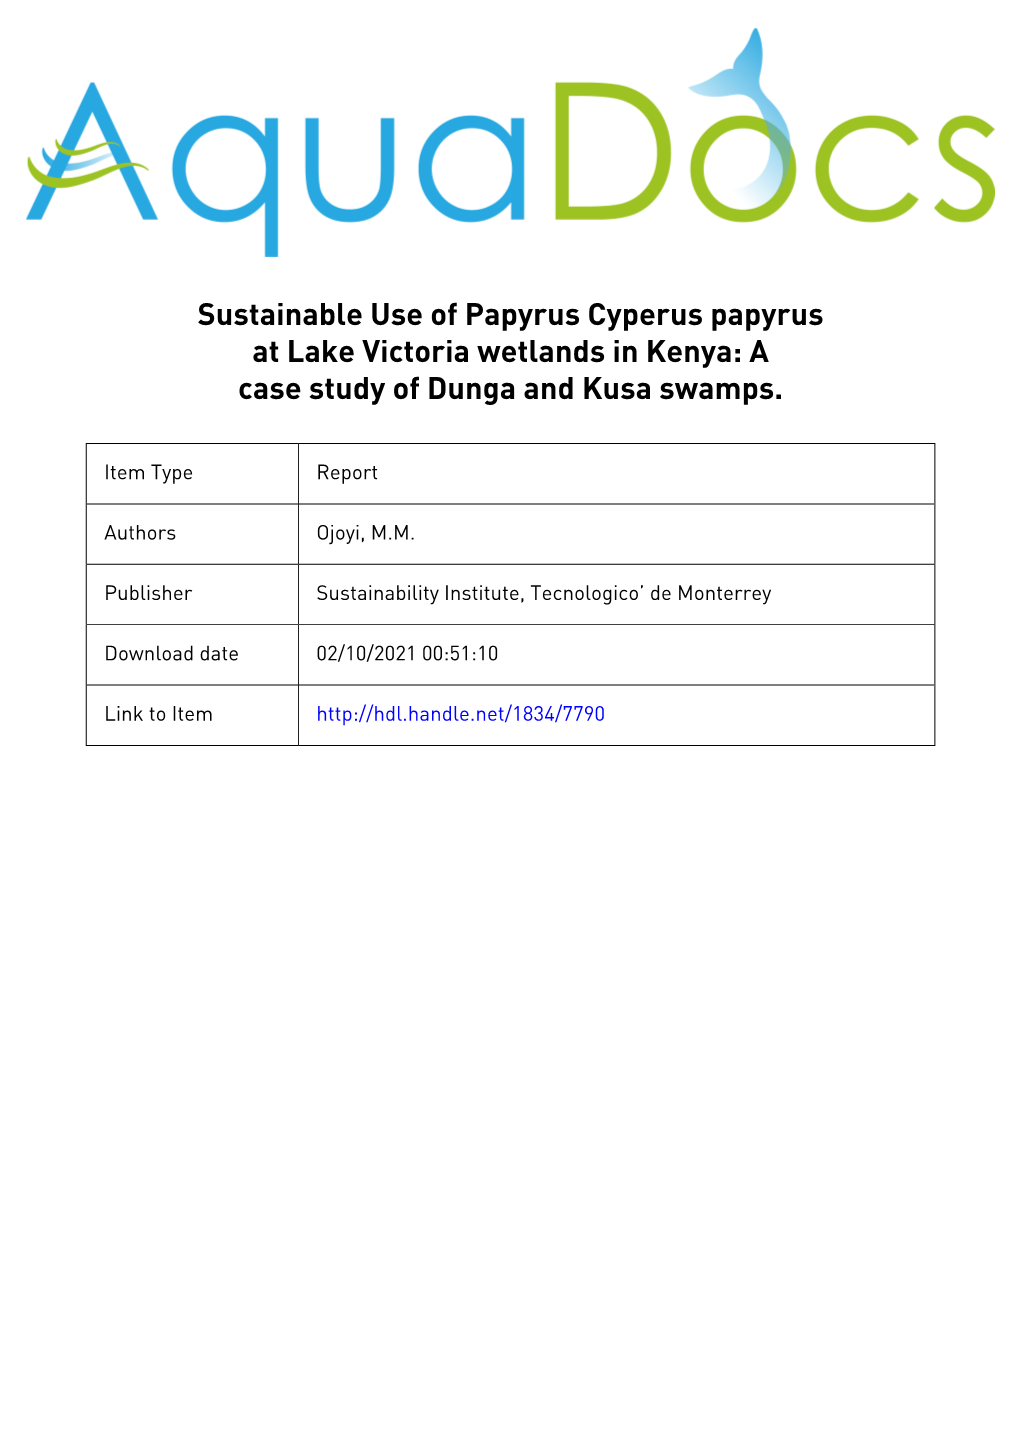 Sustainable Use of Papyrus Cyperus Papyrus at Lake Victoria Wetlands in Kenya: a Case Study of Dunga and Kusa Swamps